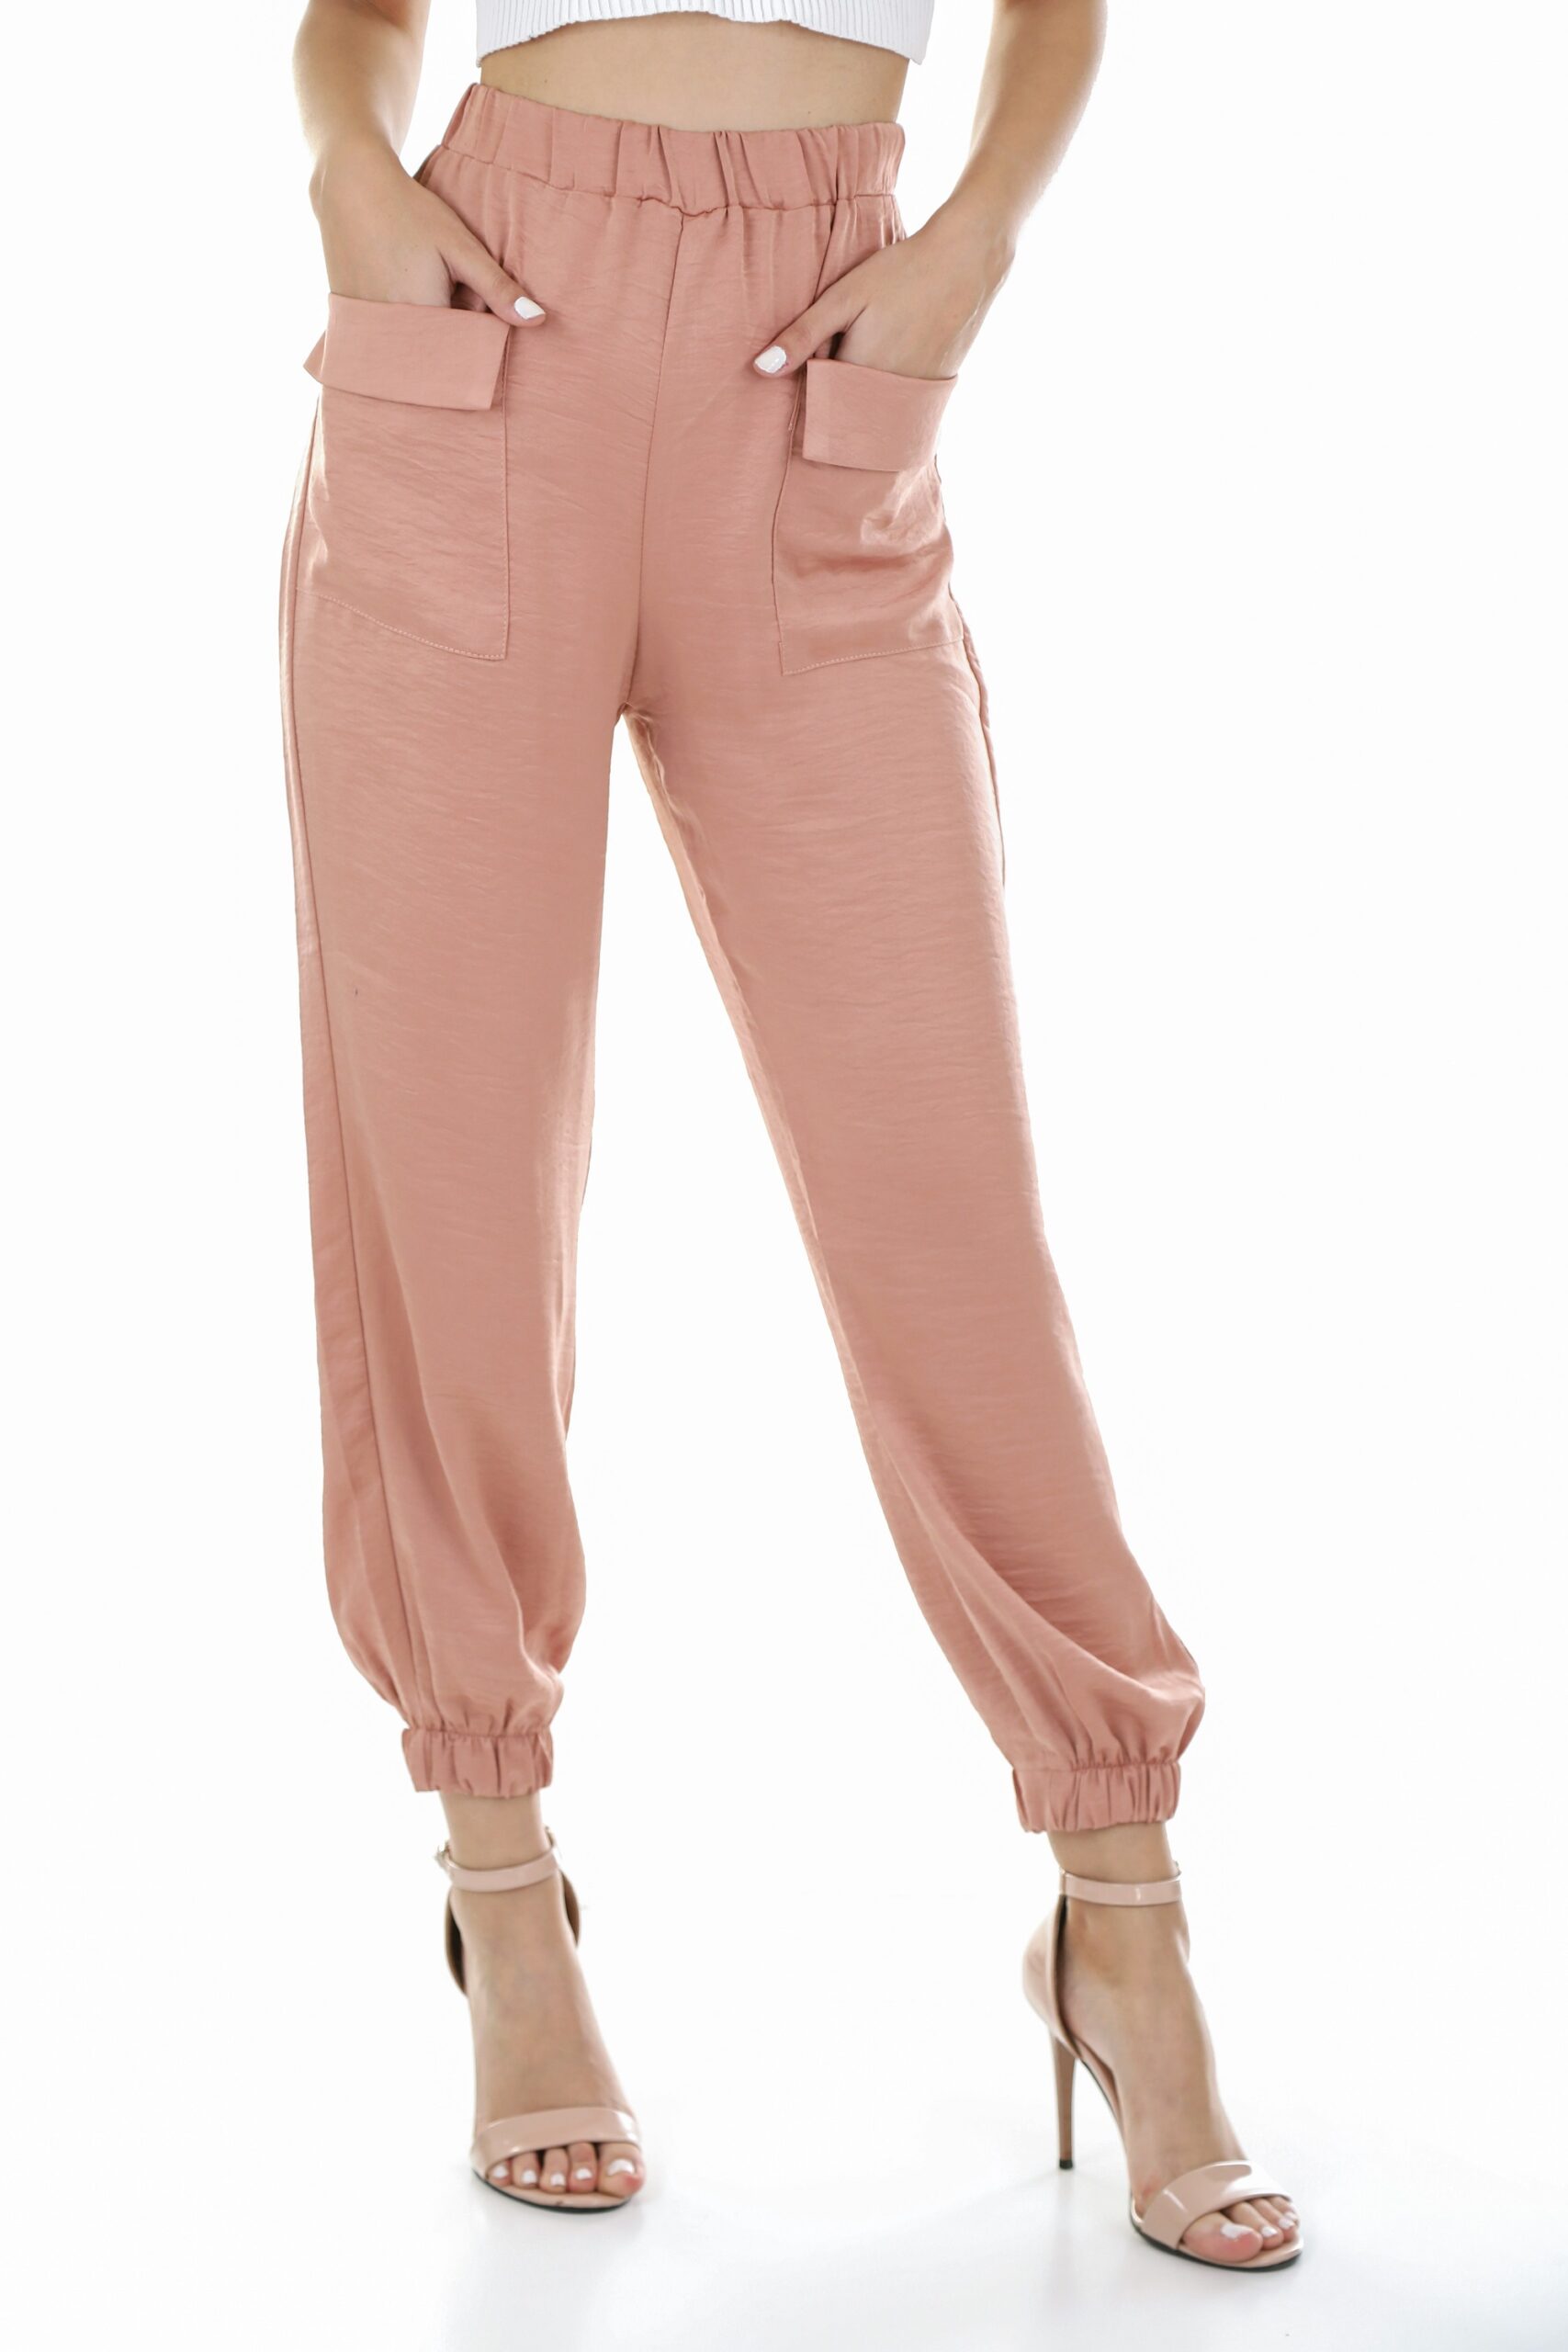 “Buddha Pants: The Ultimate Comfort in Ethical and Sustainable Fashion”